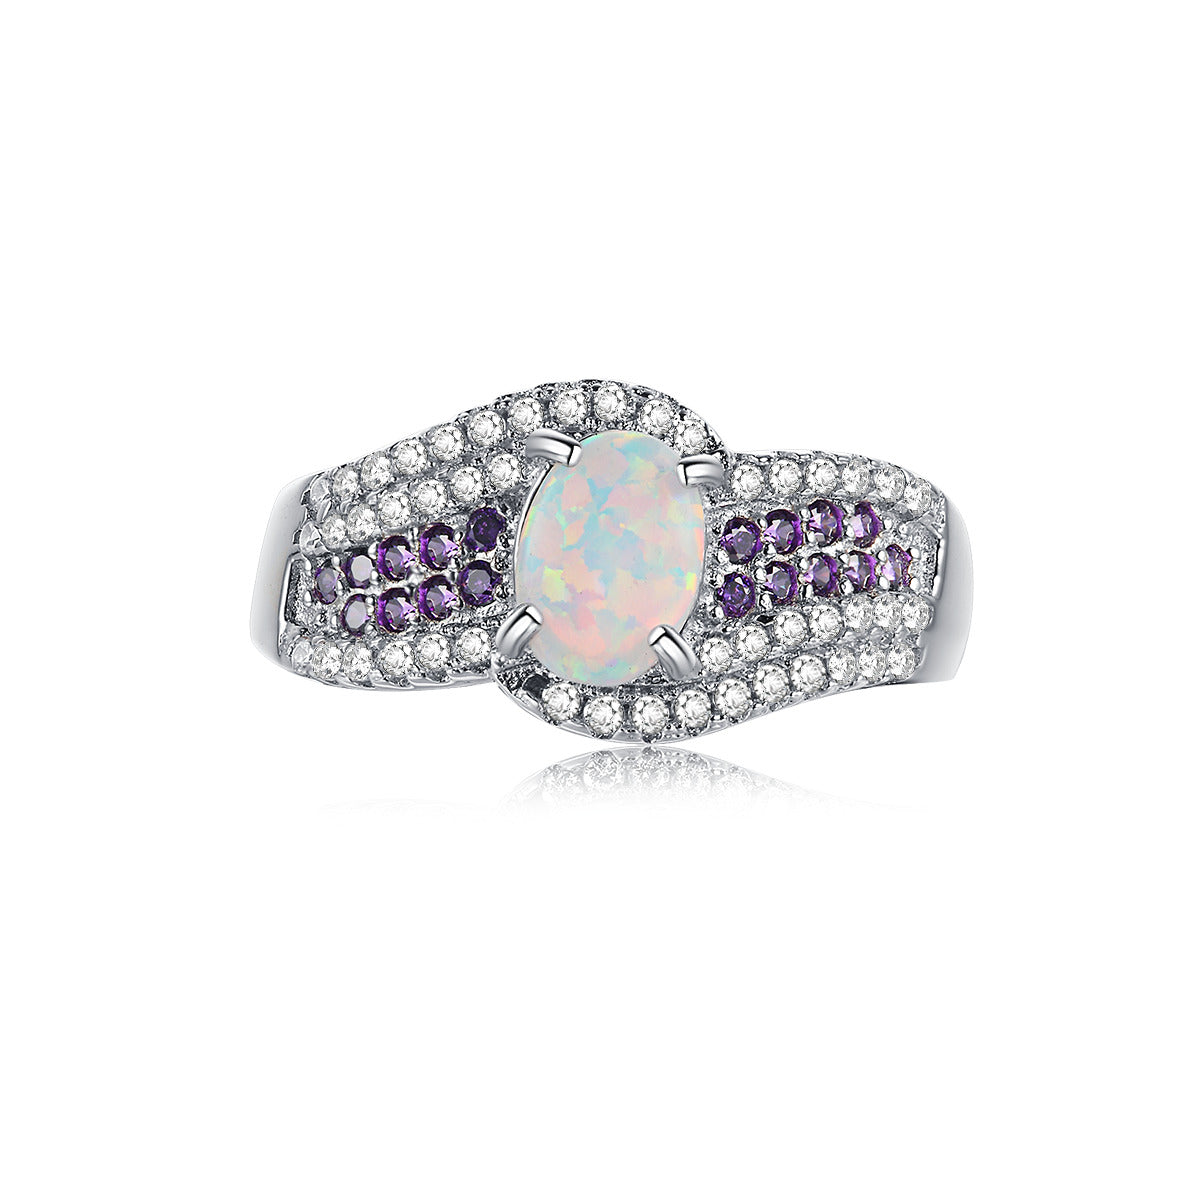 "Finesse" Opal Oval-Cut Ring Sterling Silver